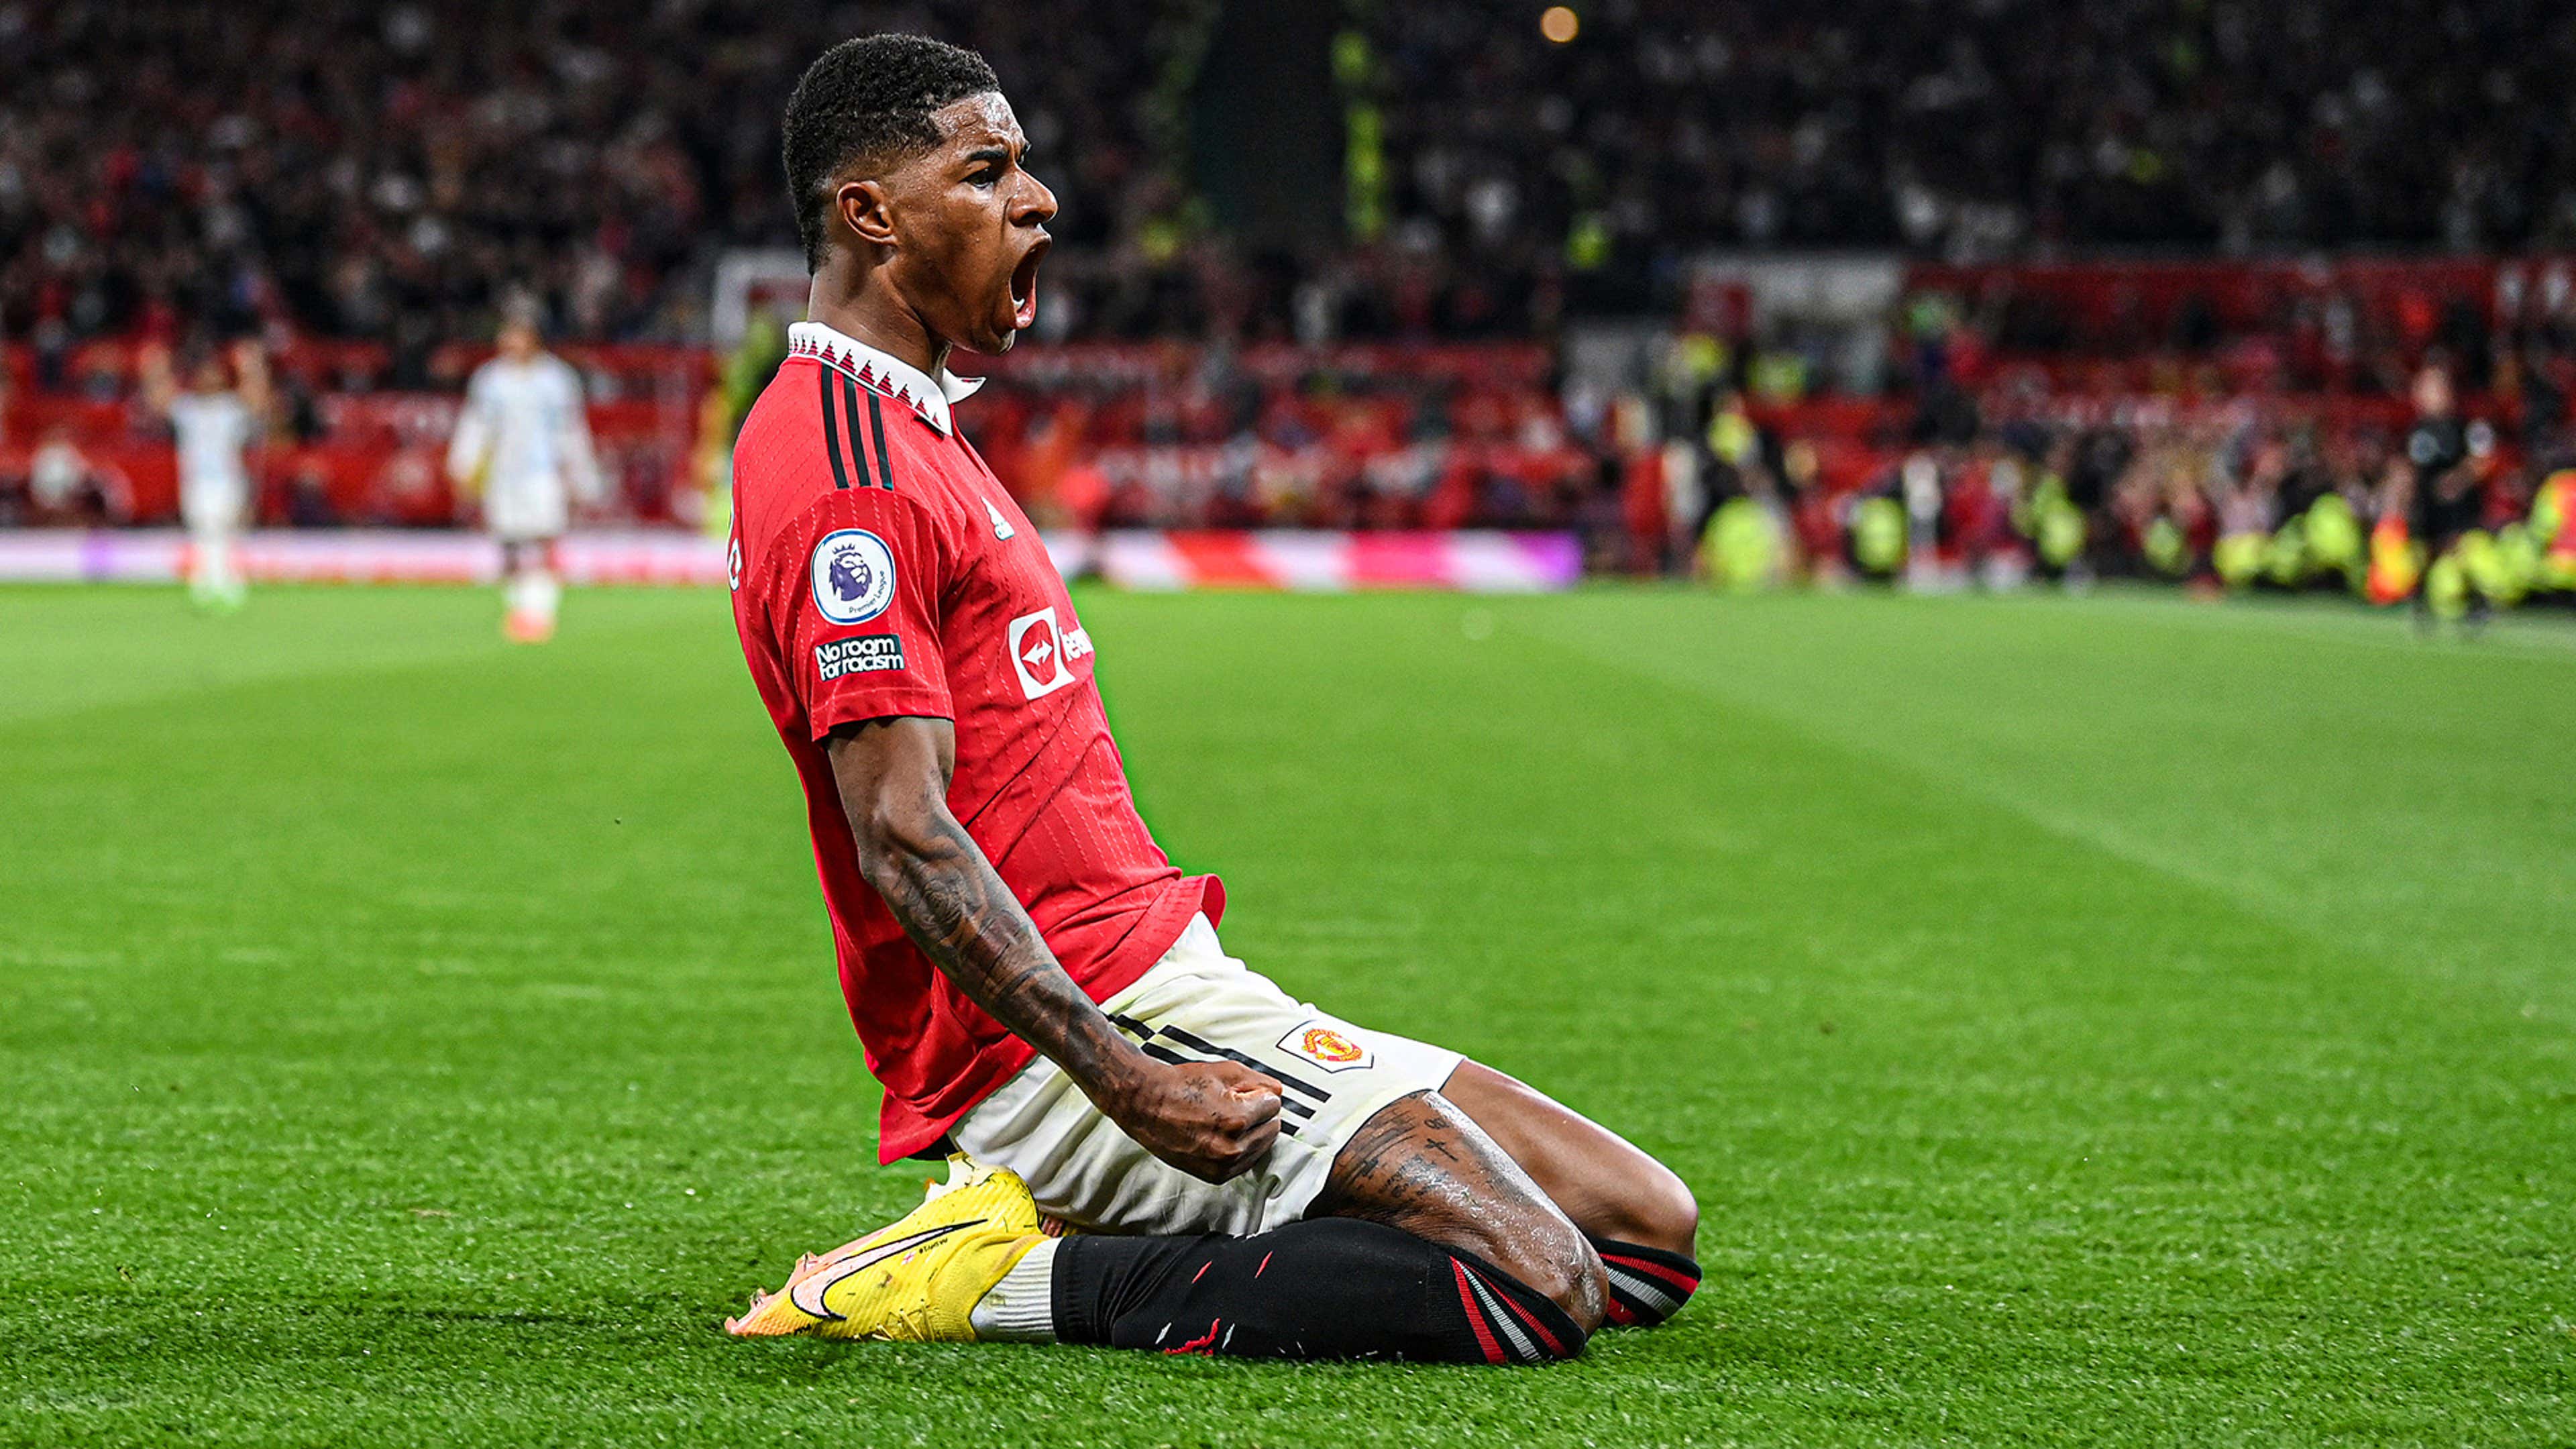 Six reasons why Man Utd are struggling to score goals: Marcus Rashford  toiling in the middle, injured star signing and a draining U.S. tour